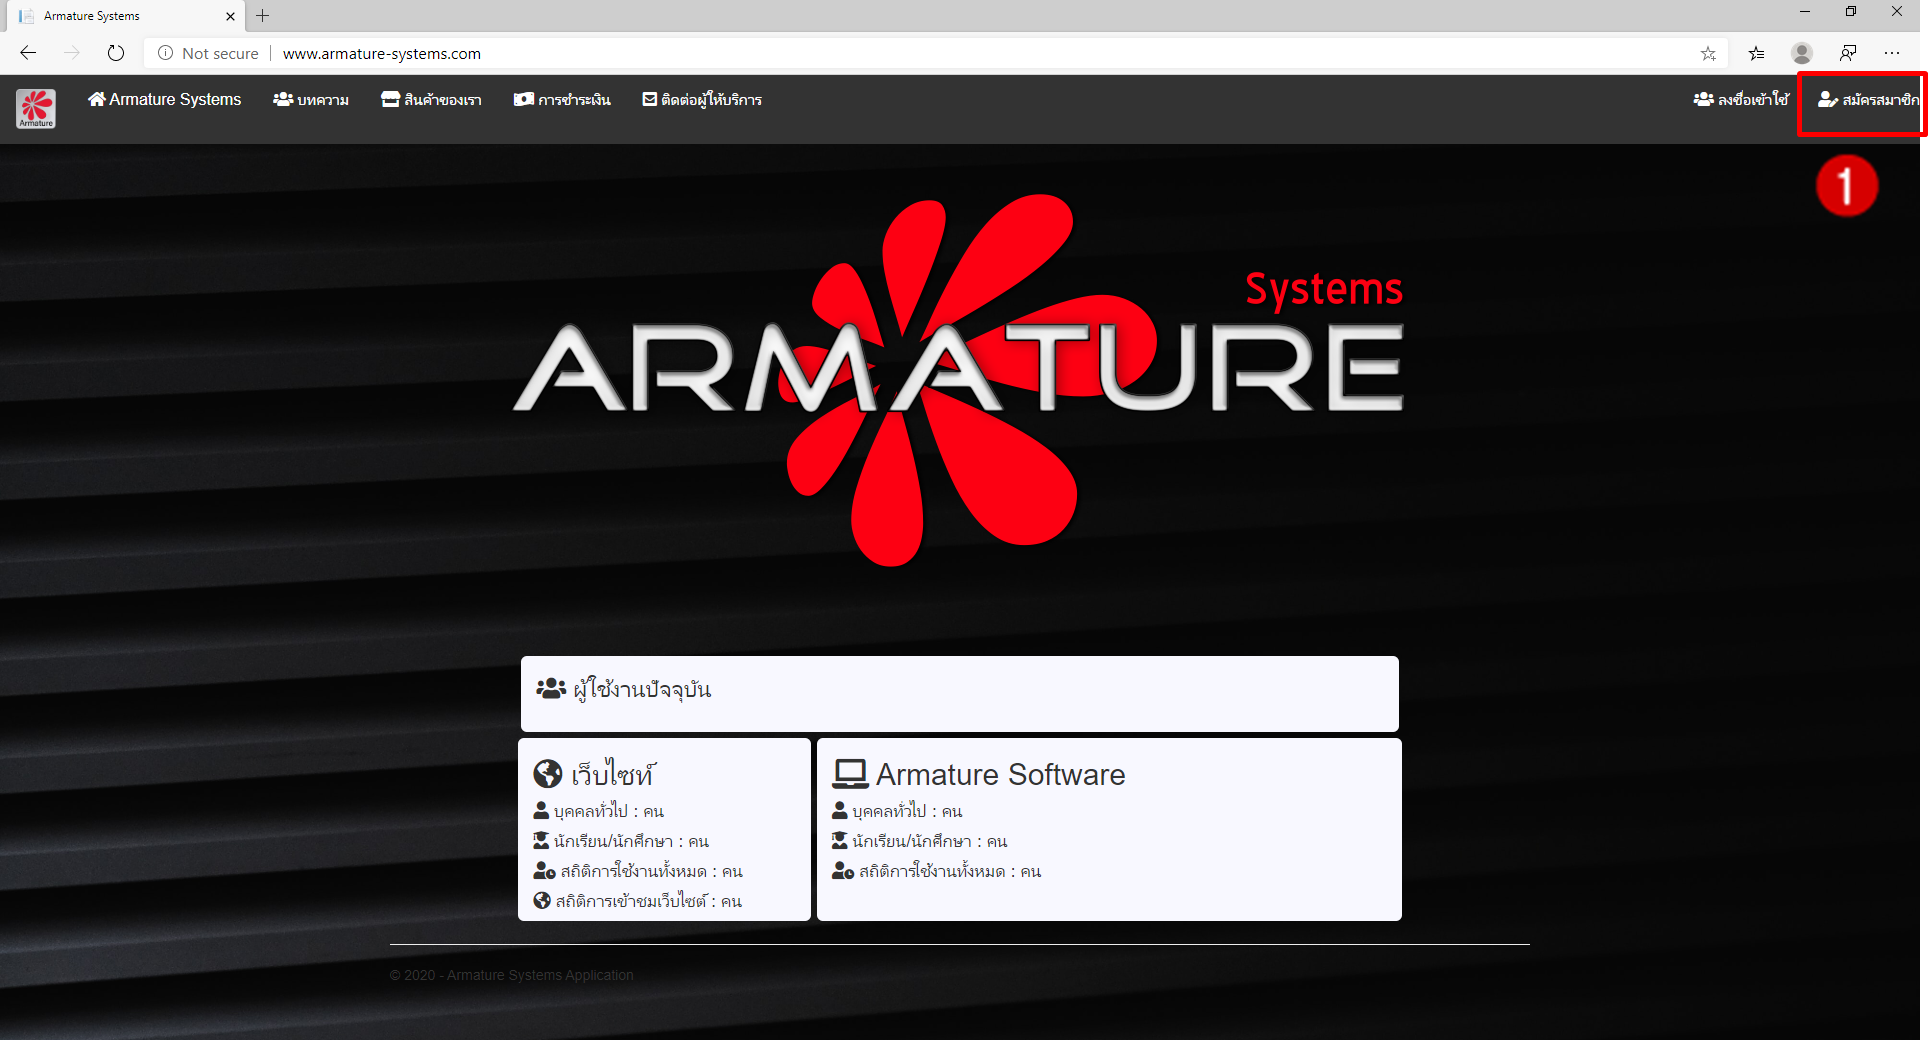 Homepage - Armature Systems